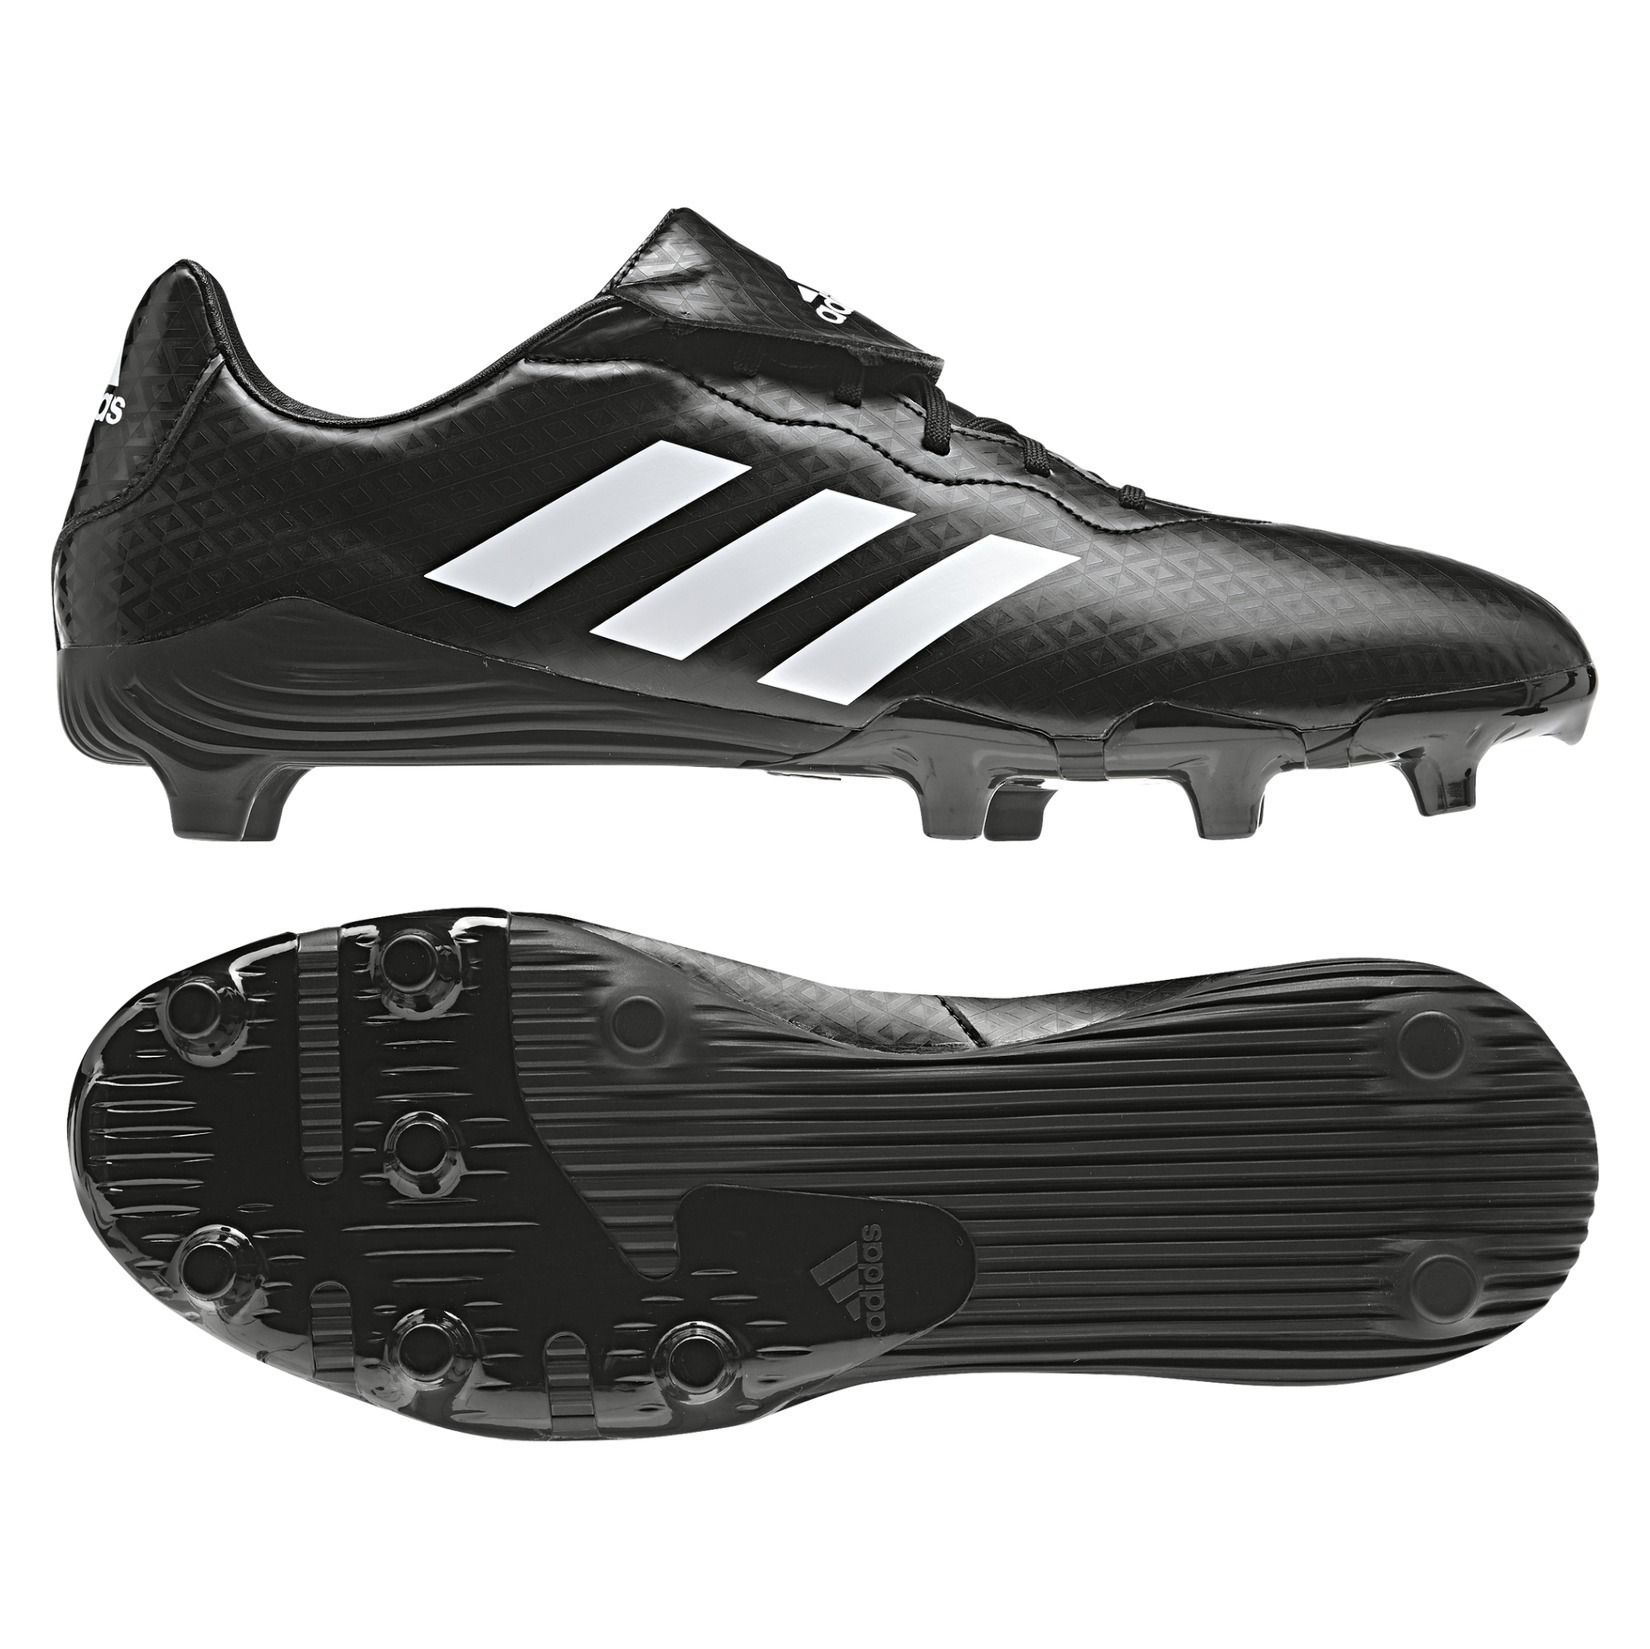 adidas Rumble Engage Rugby Boots